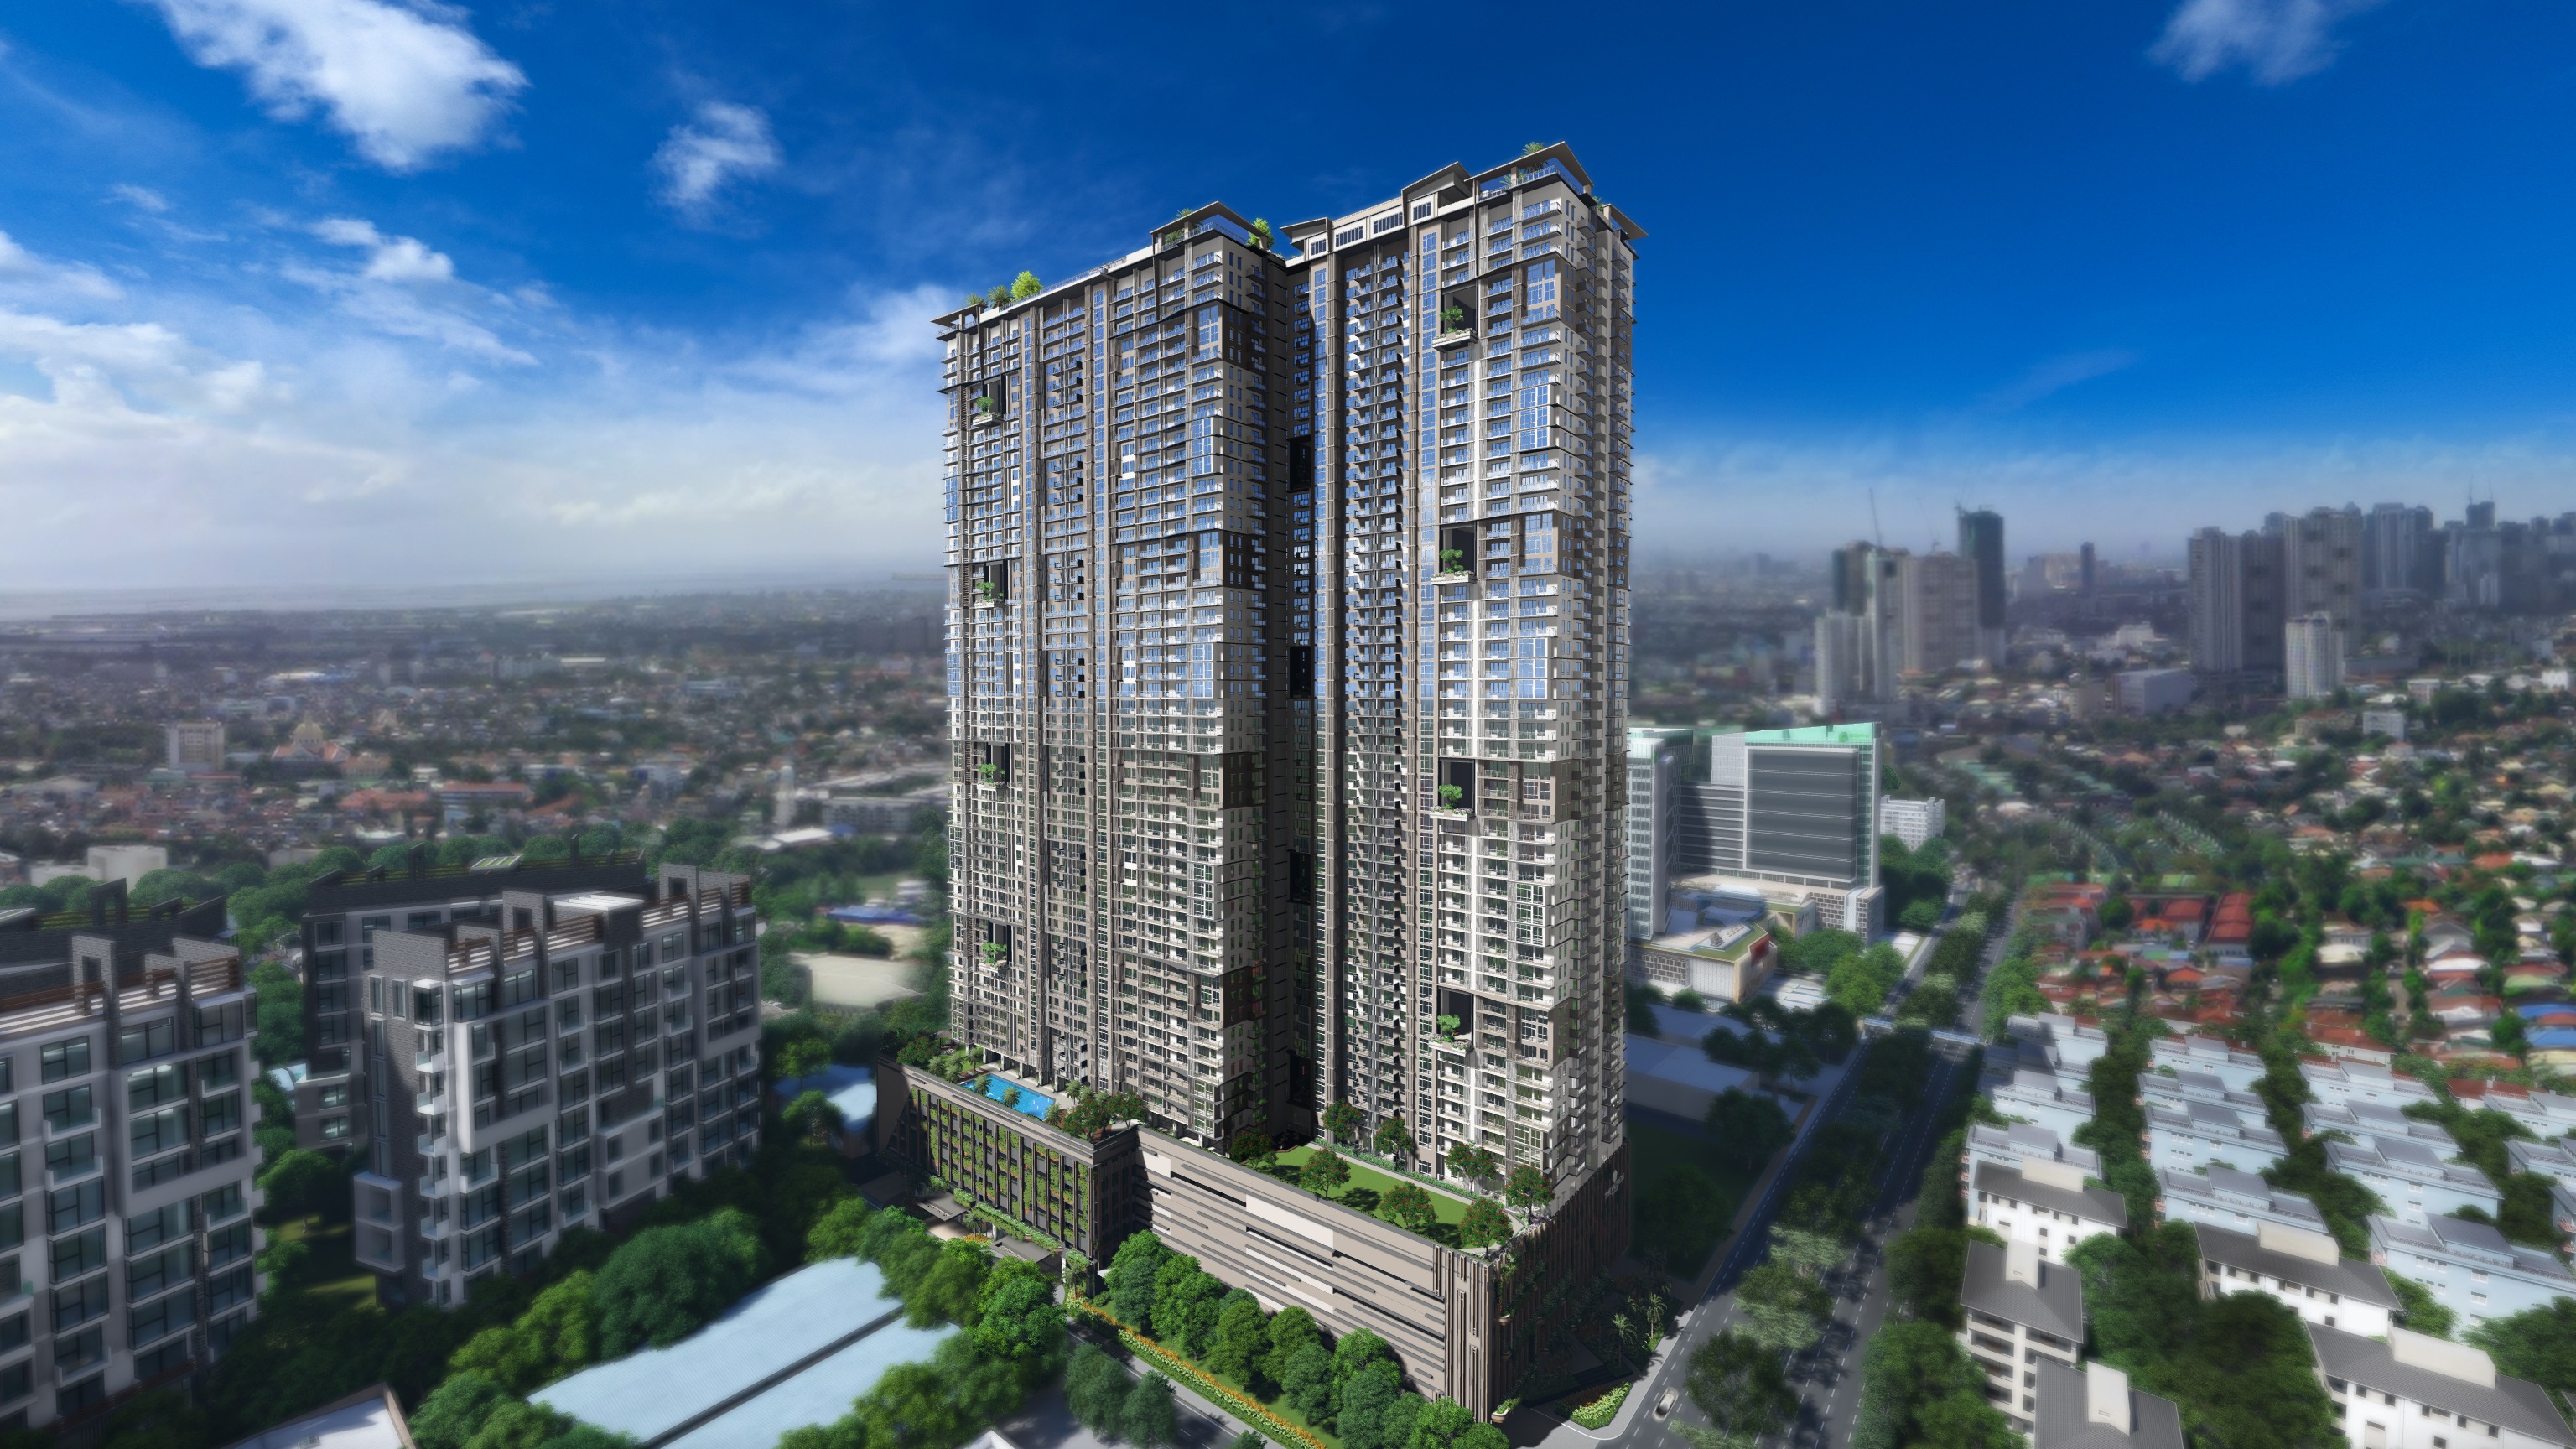 dmci-homes-japans-marubeni-corp-to-develop-the-valeron-tower-condo-in-pasig-1702948371682